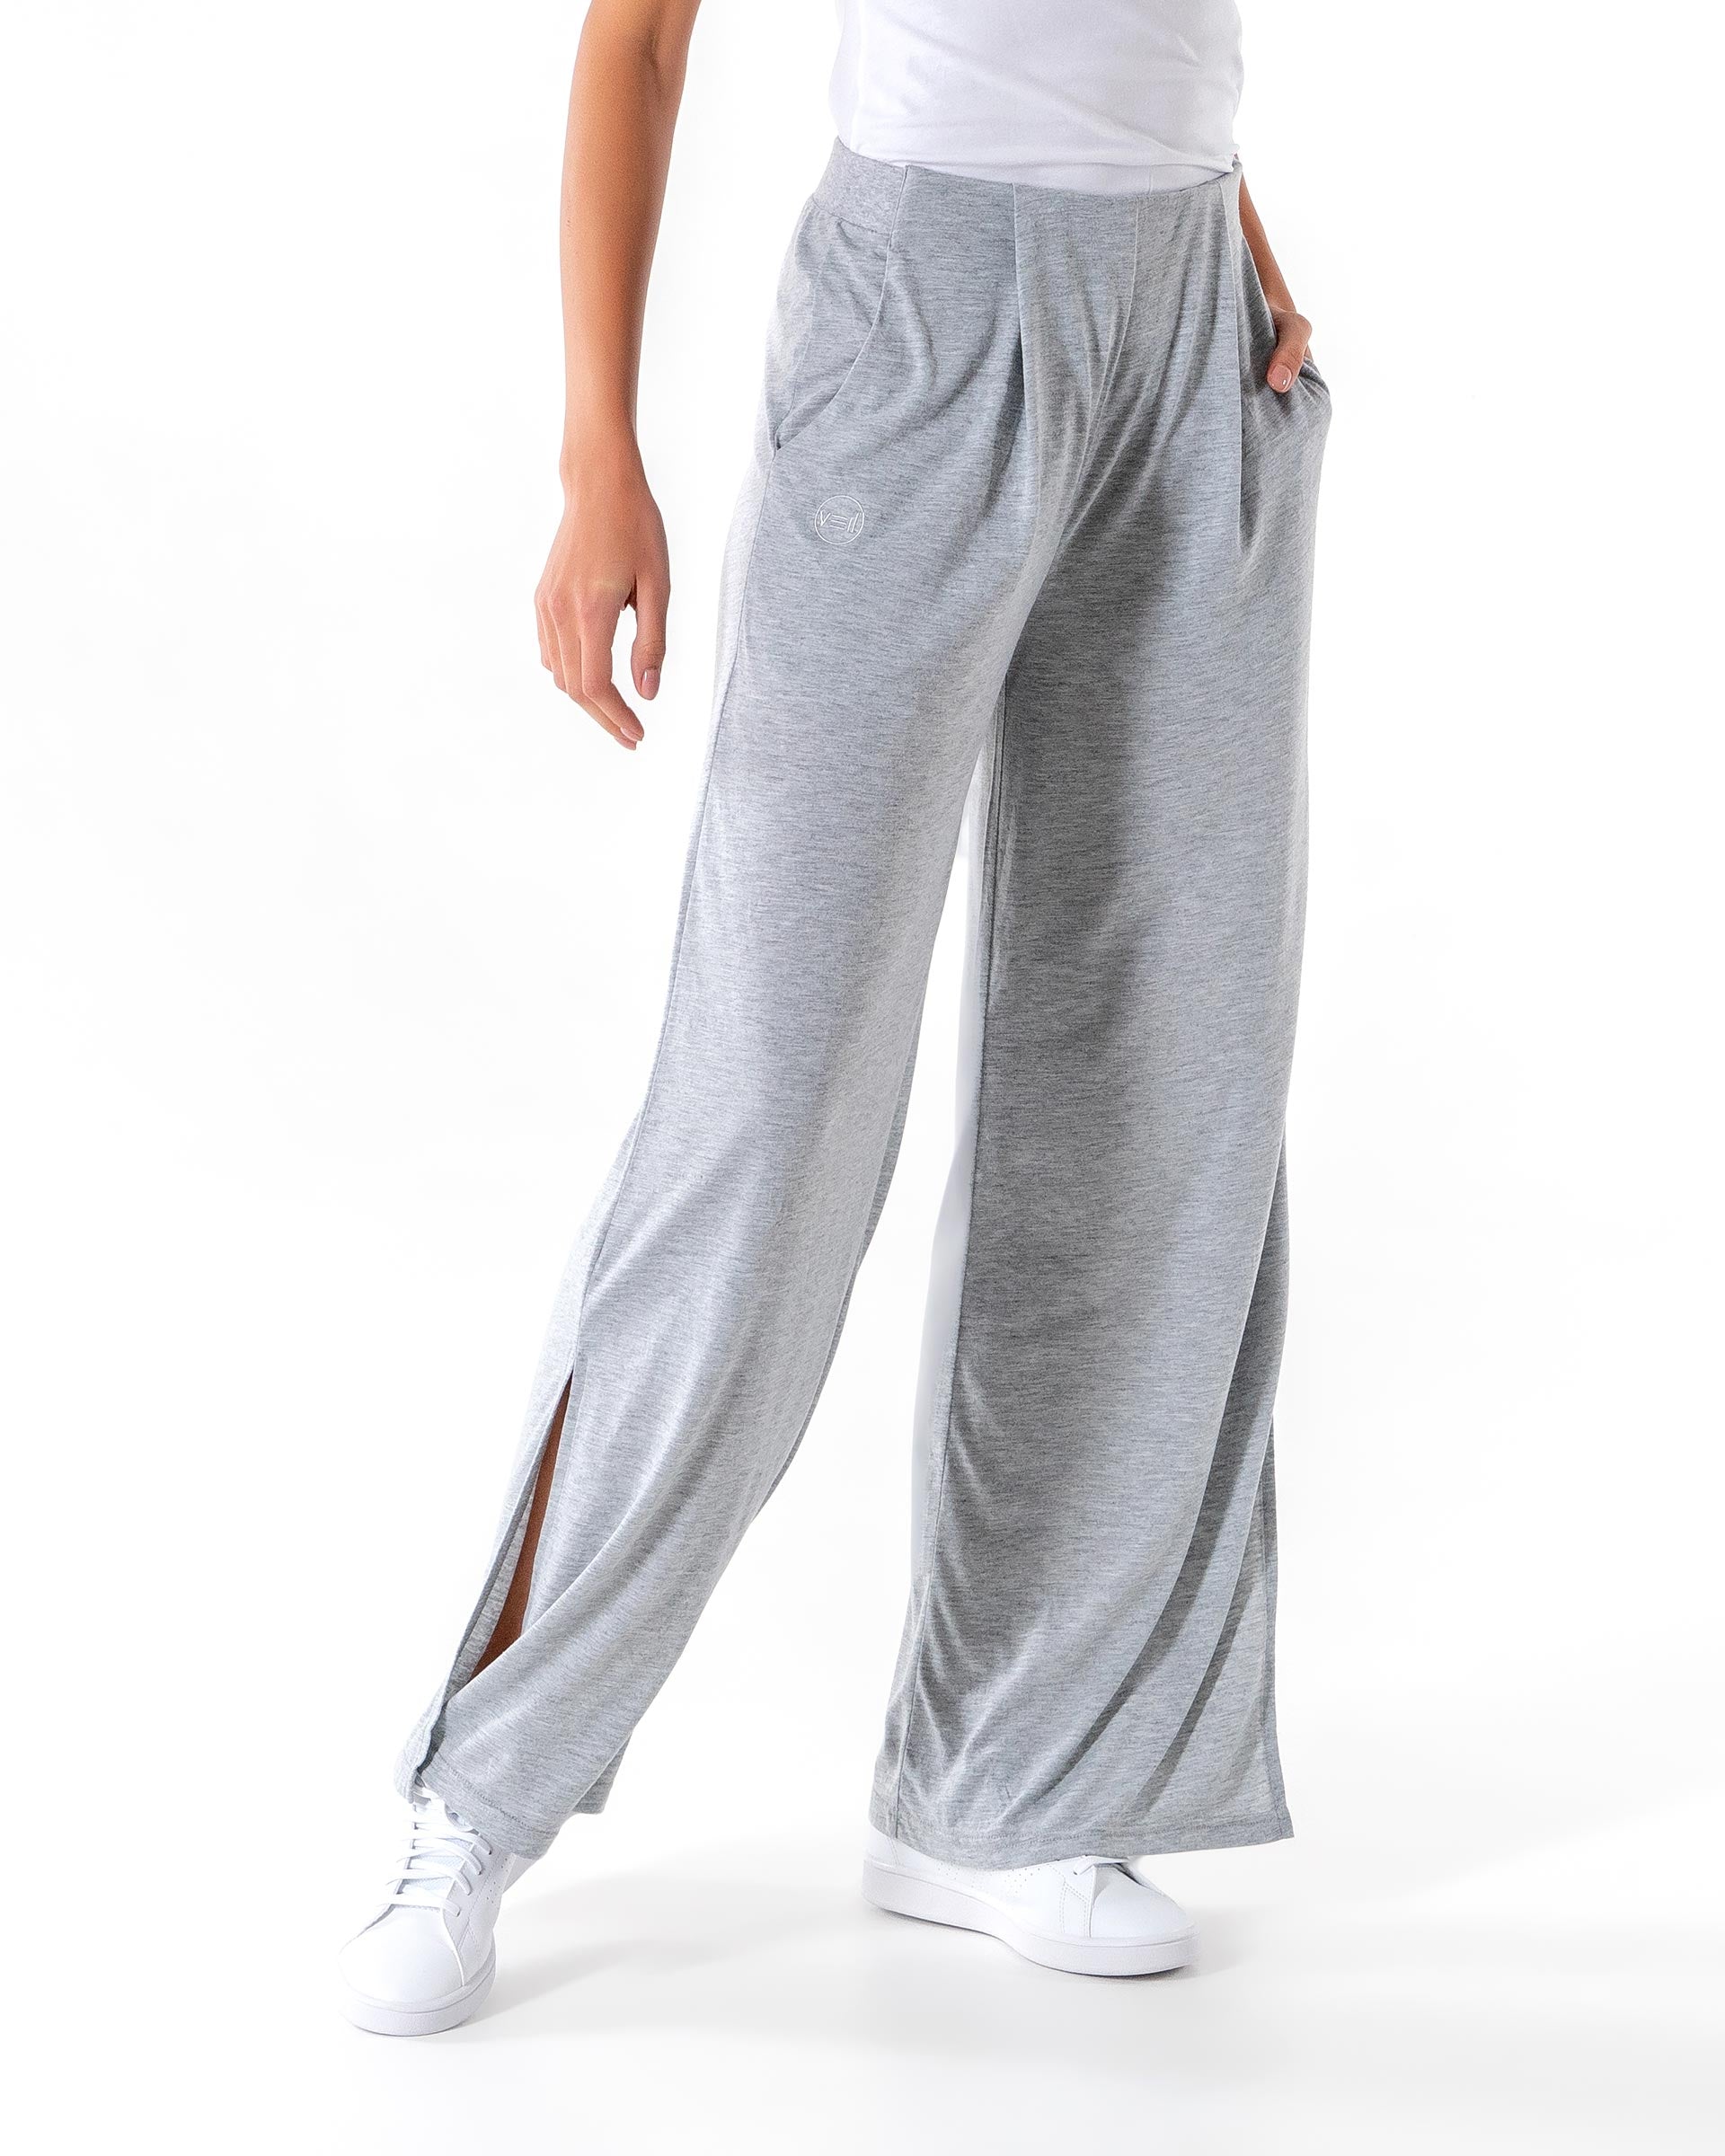 Swift Wide Leg Sweatpant - Shop Modest Activewear and Apparel